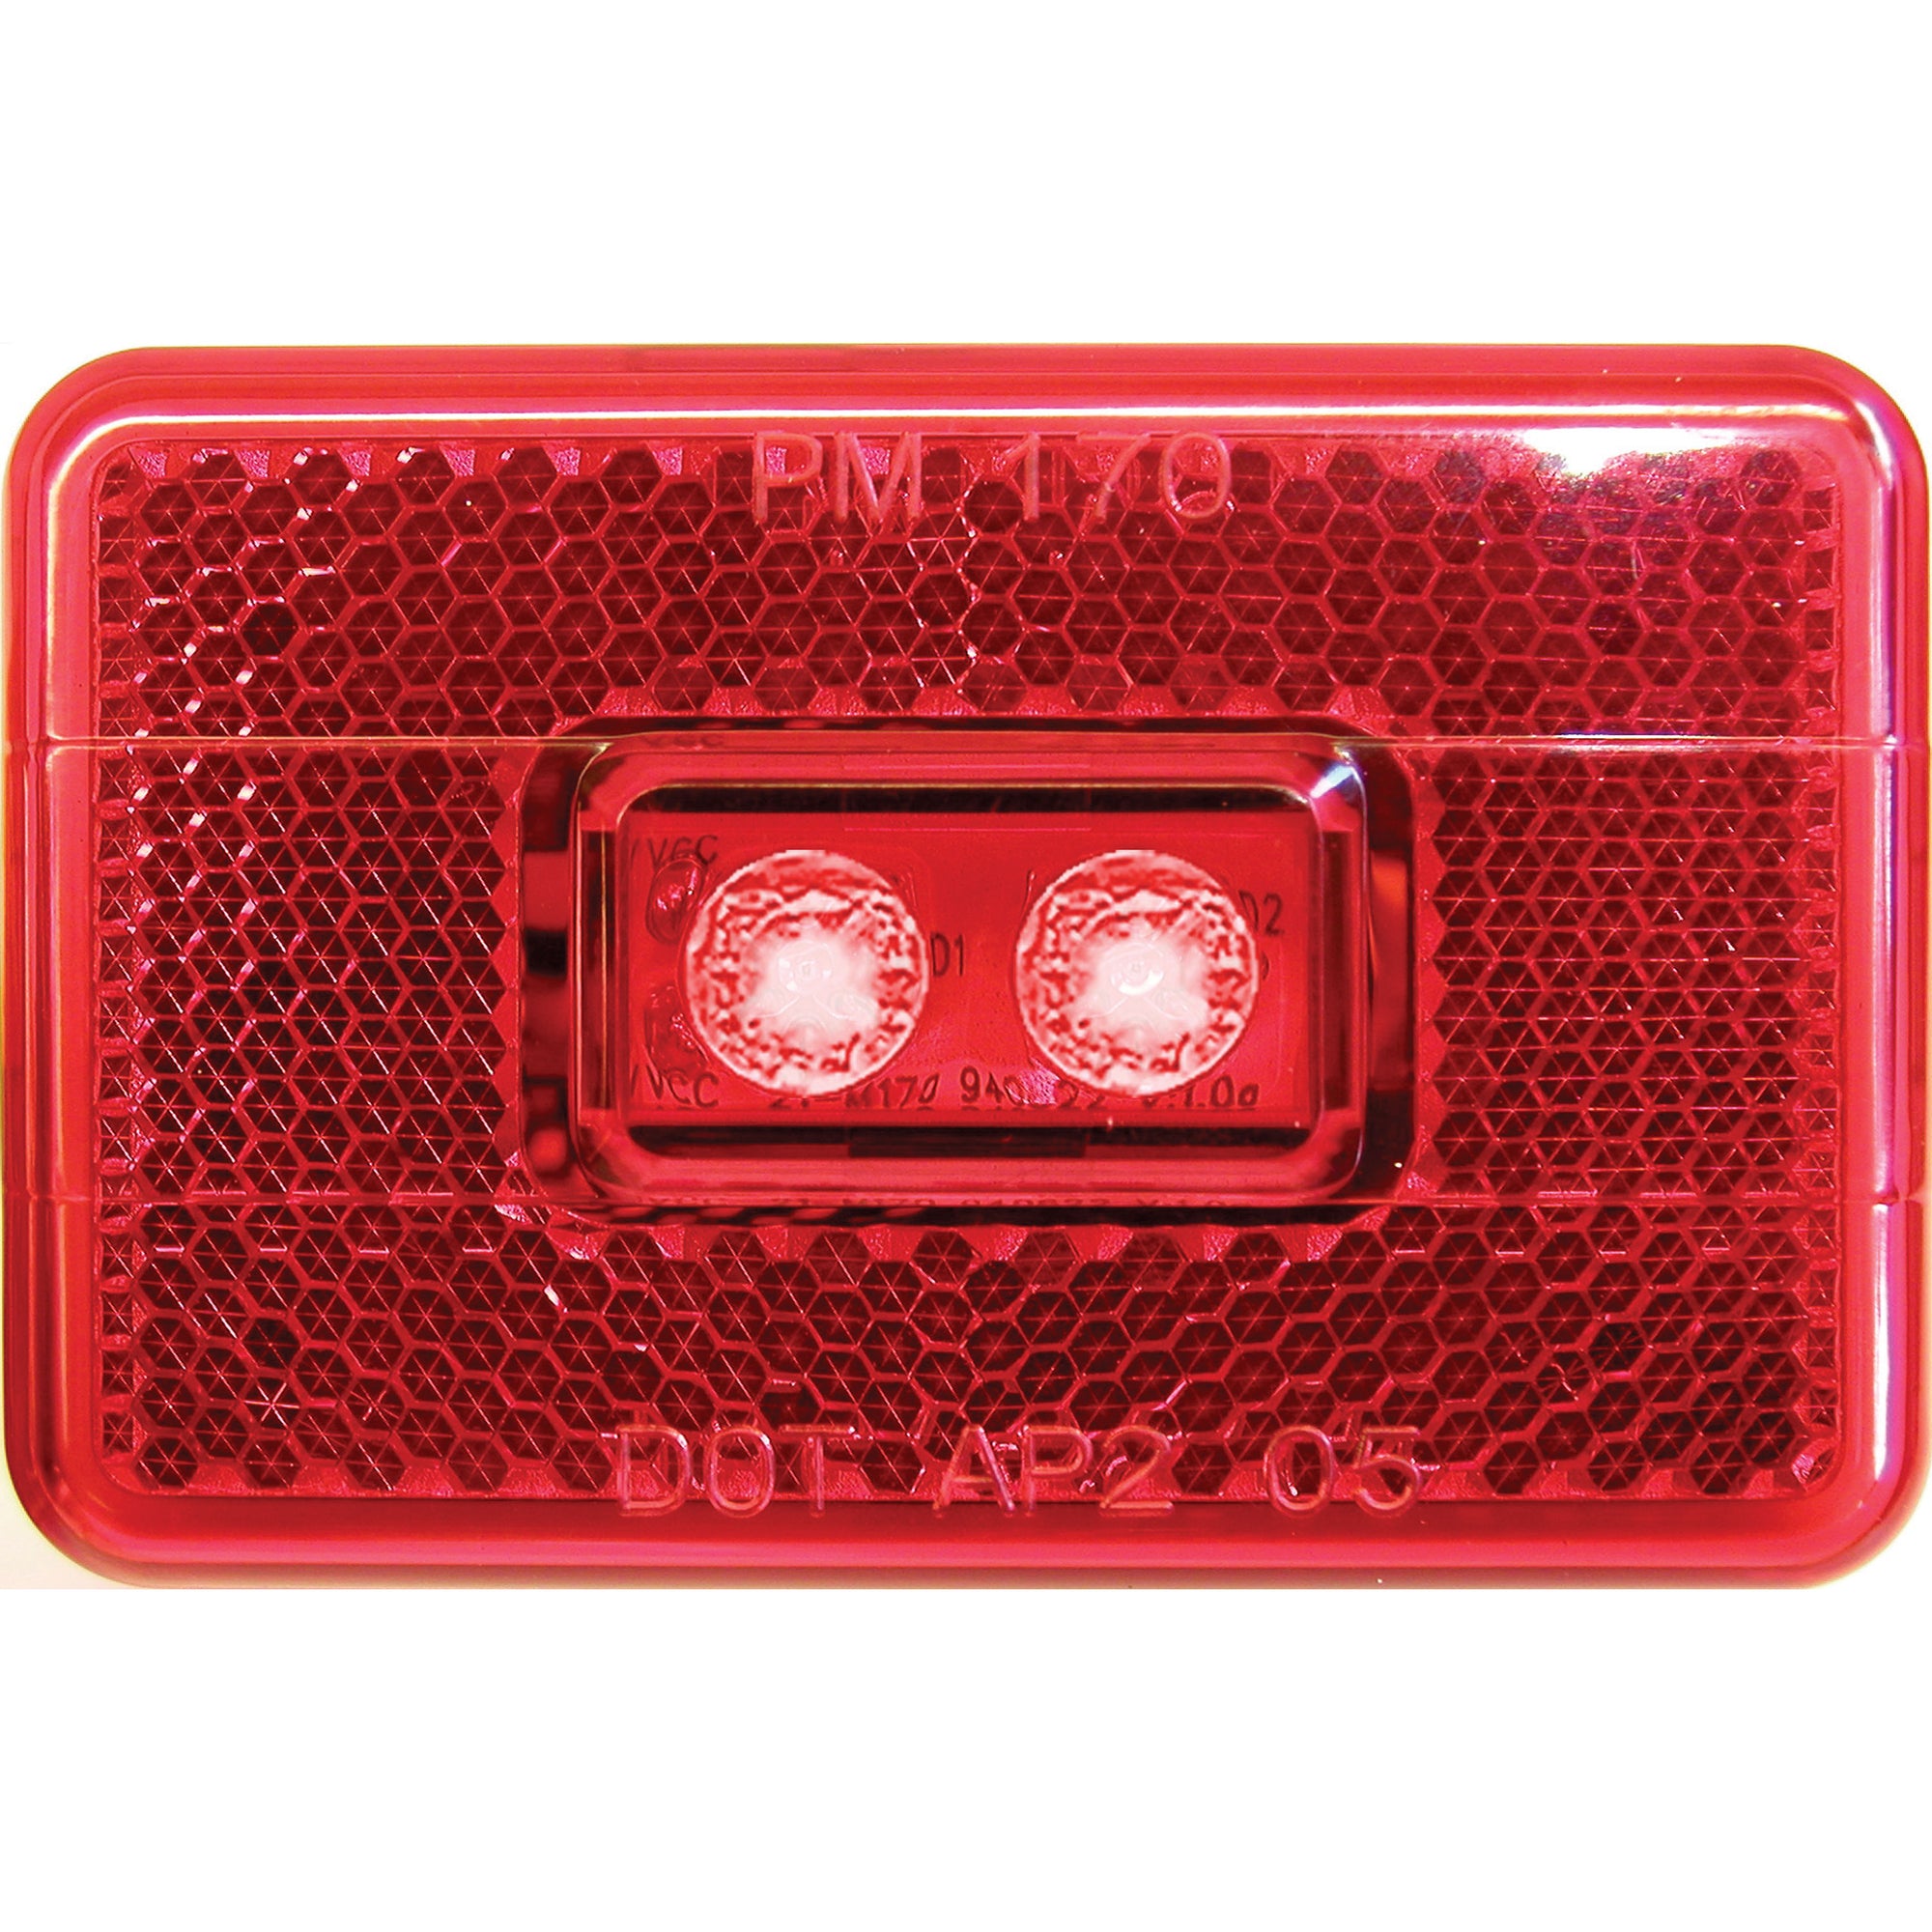 Peterson V170R The 170 Series Piranha LED Clearance/Side Marker Light with Reflex - Red